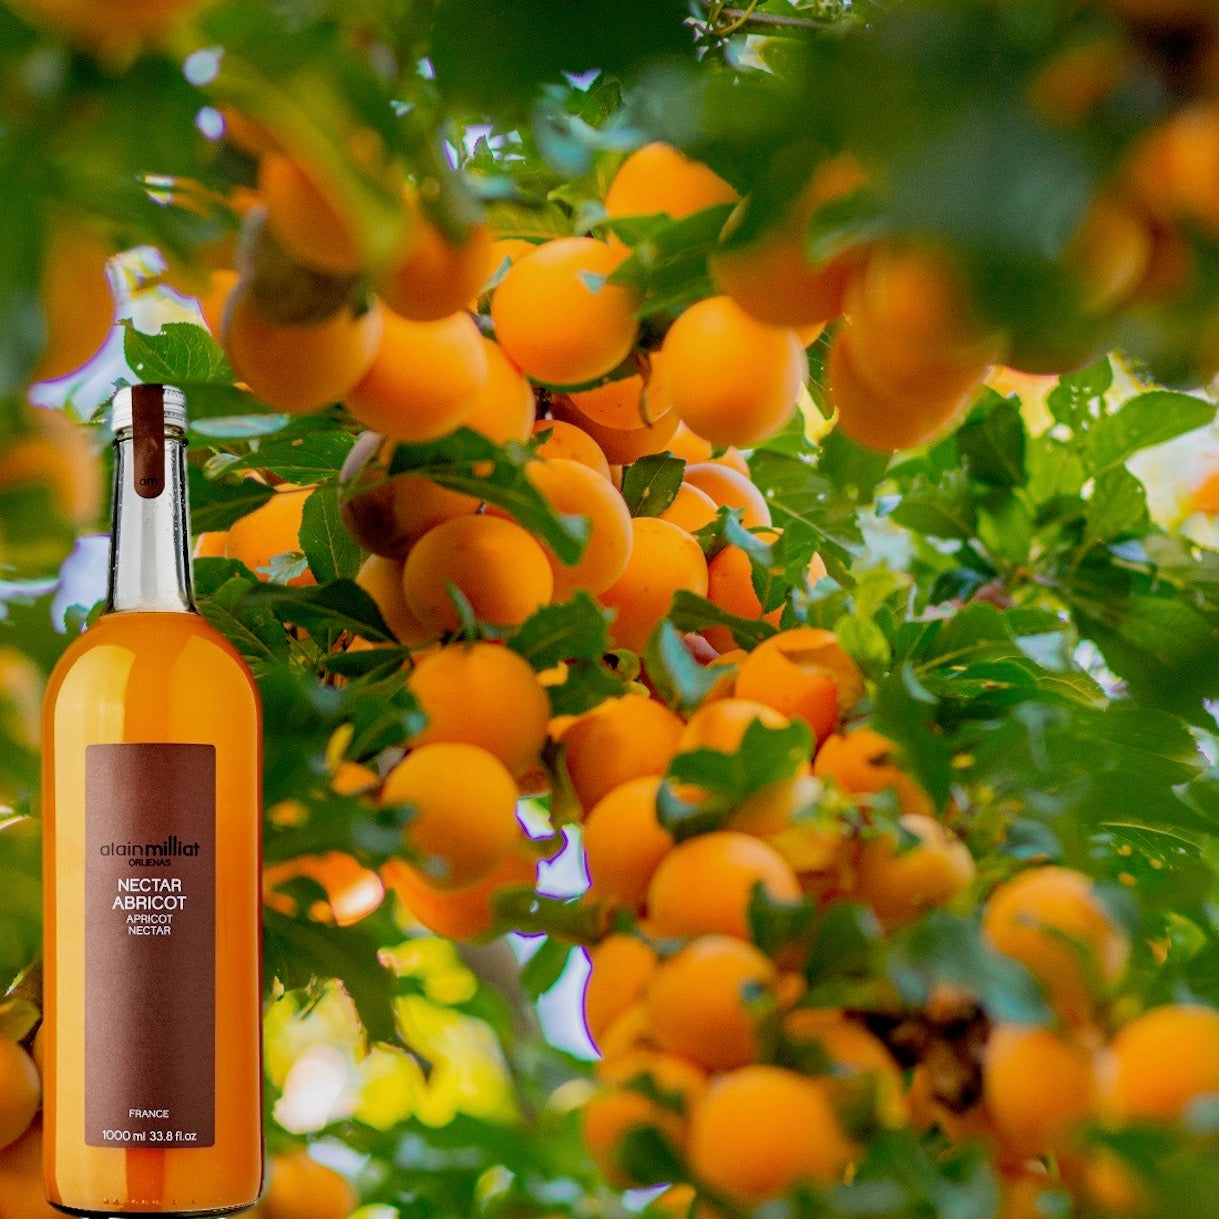 Apricot-nectar-alain-milliat-online-grocery-delivery-singapore-thenewgrocer